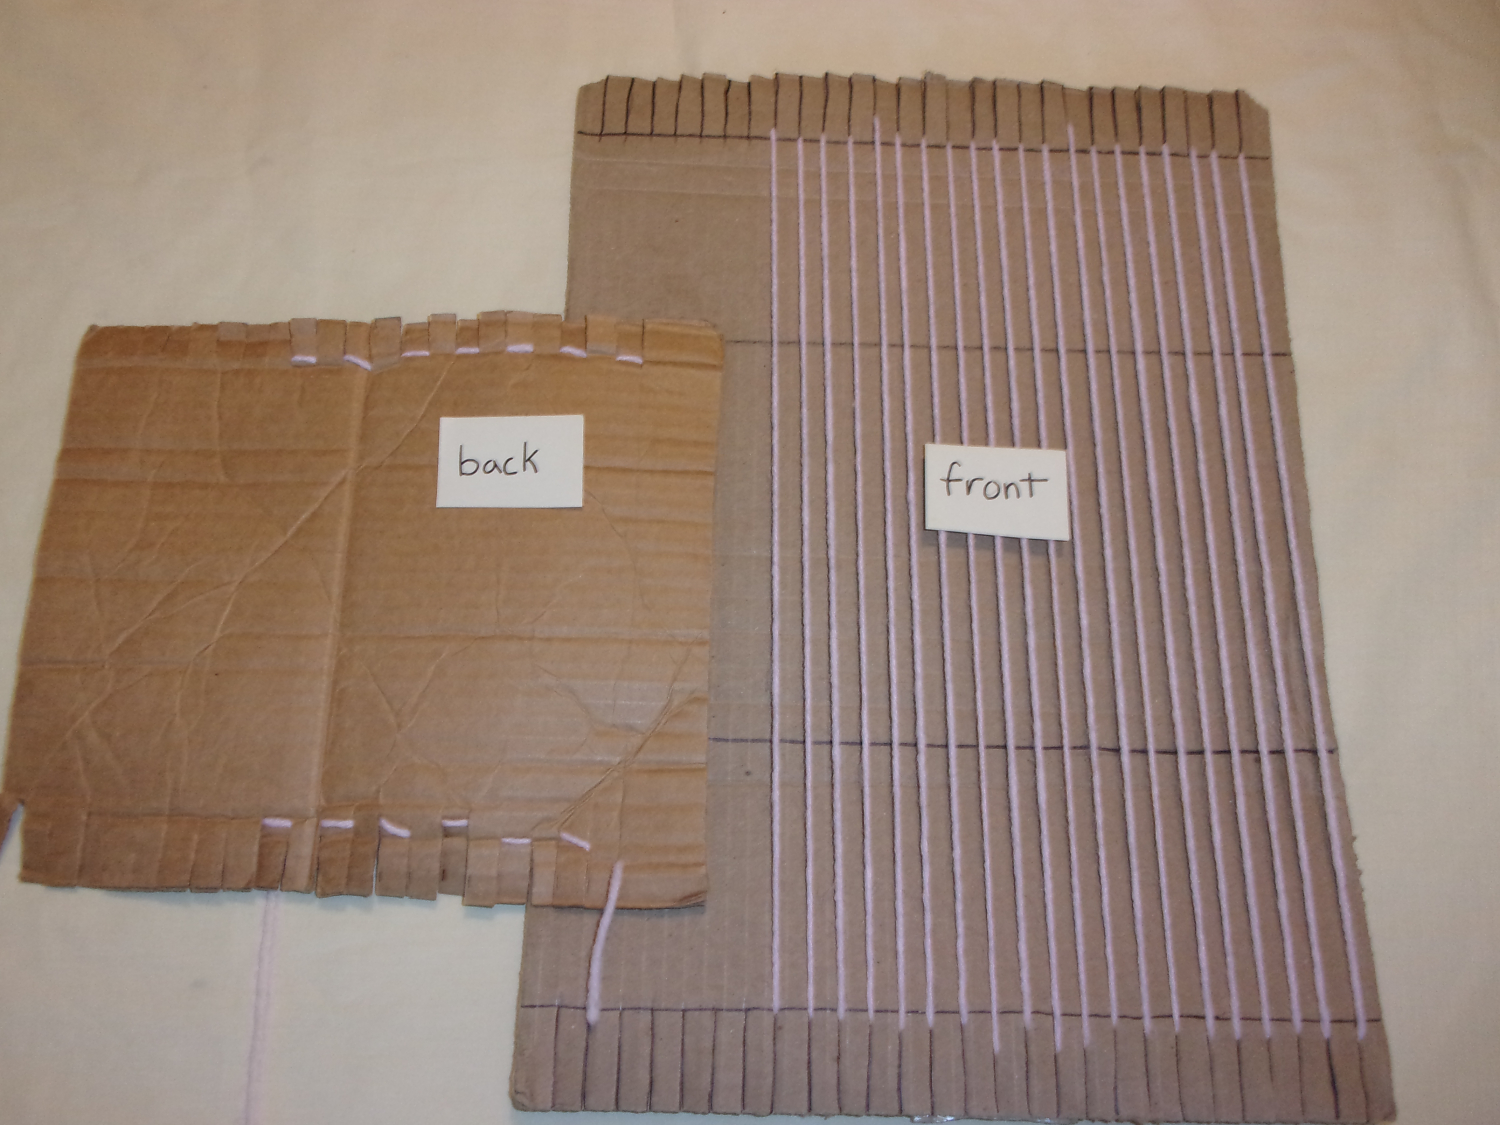 Two cardboard looms, one showing the front and the other showing the back. The front side has all of the visible yarn